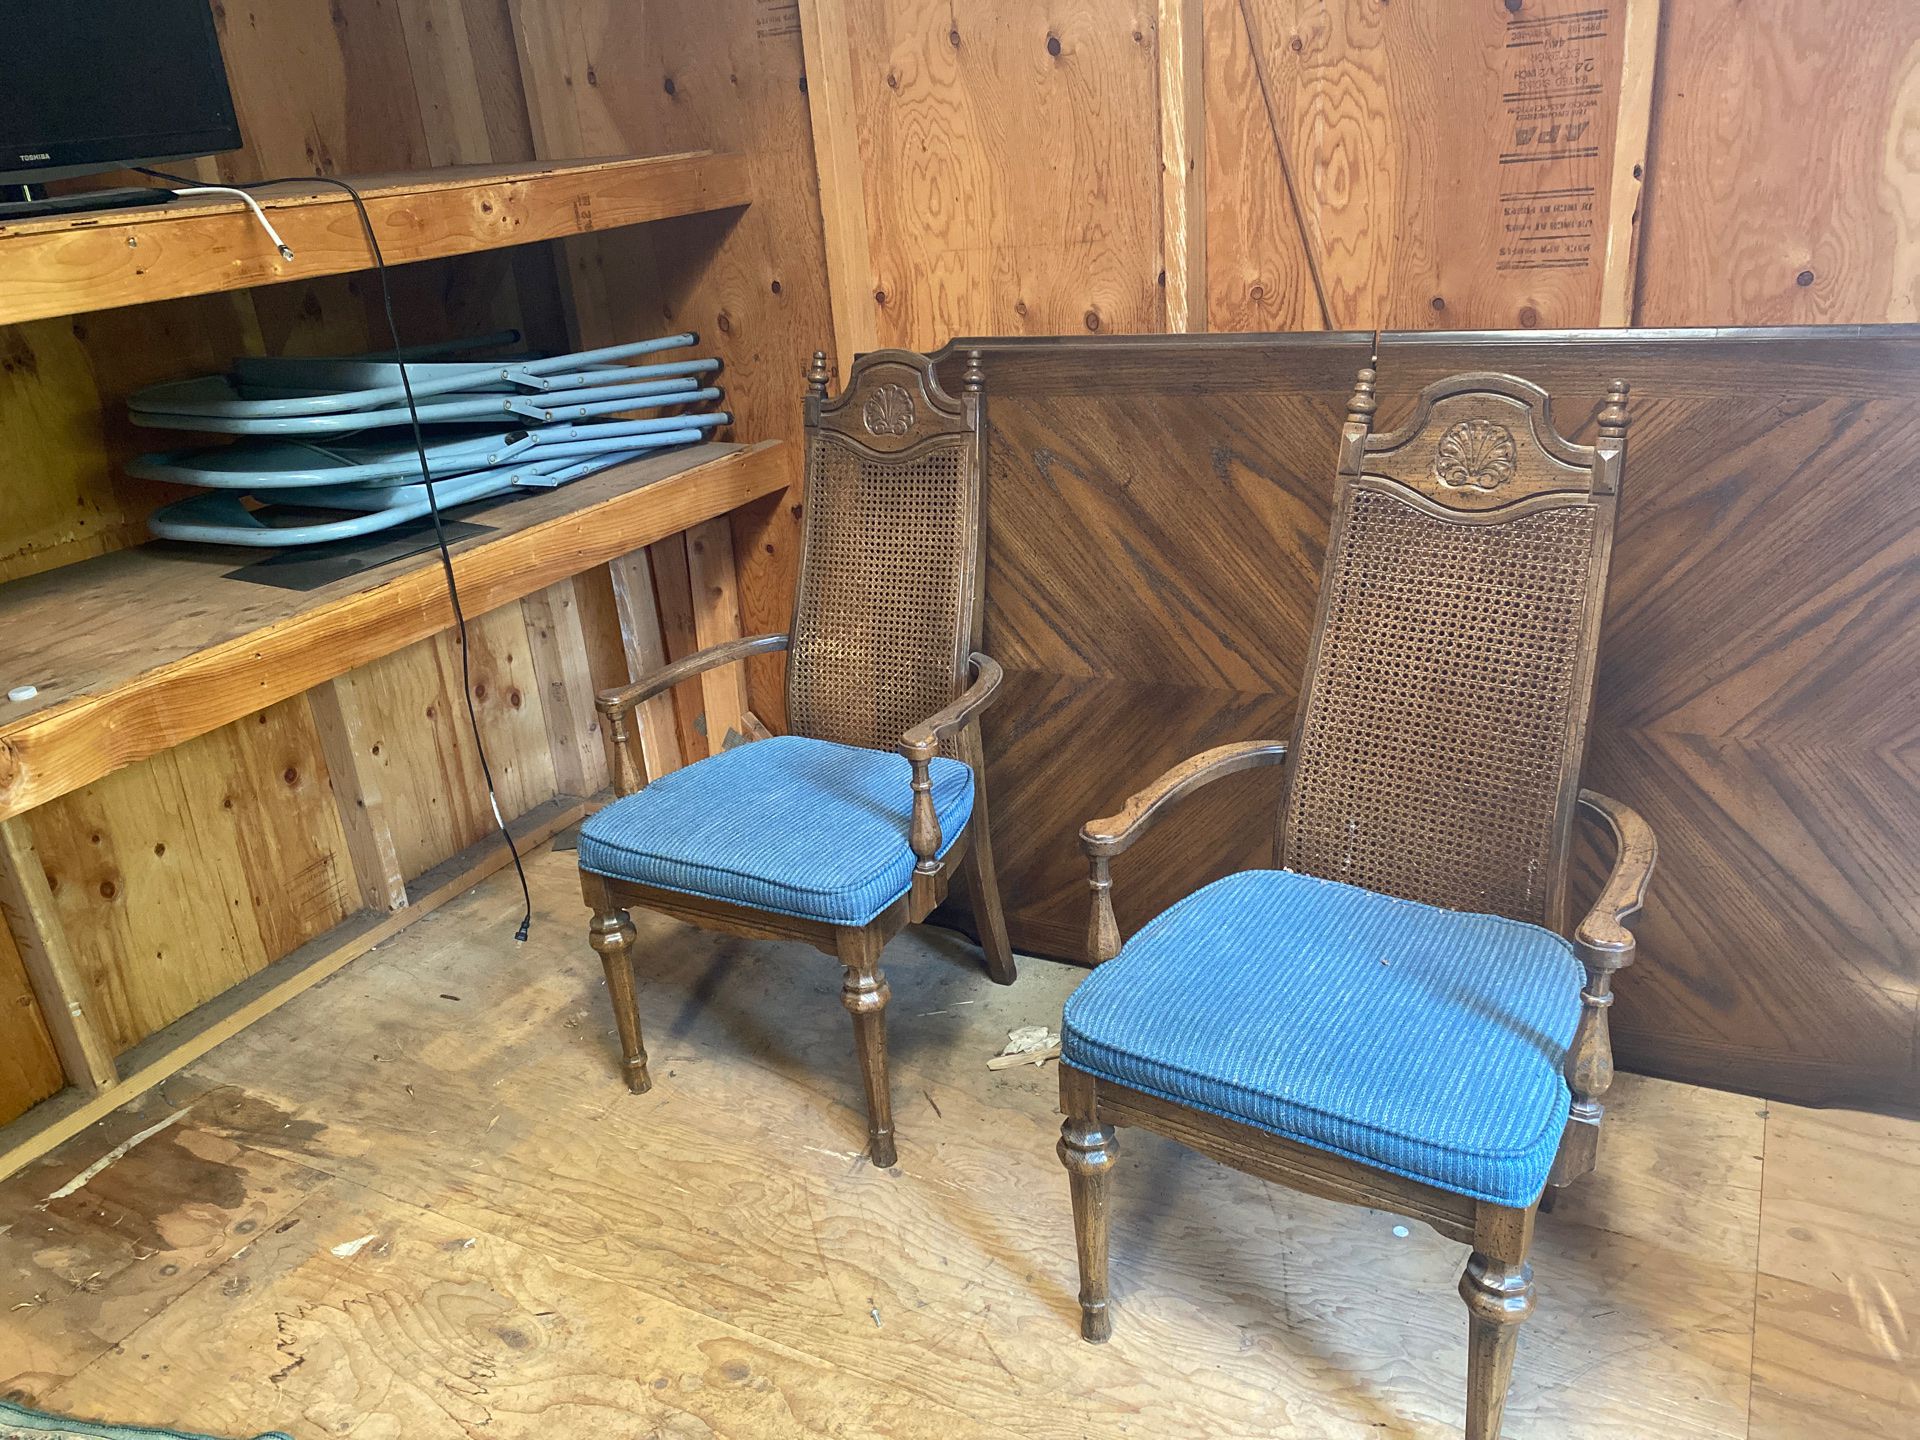 Free items - chairs dining table, antiques, vitamix